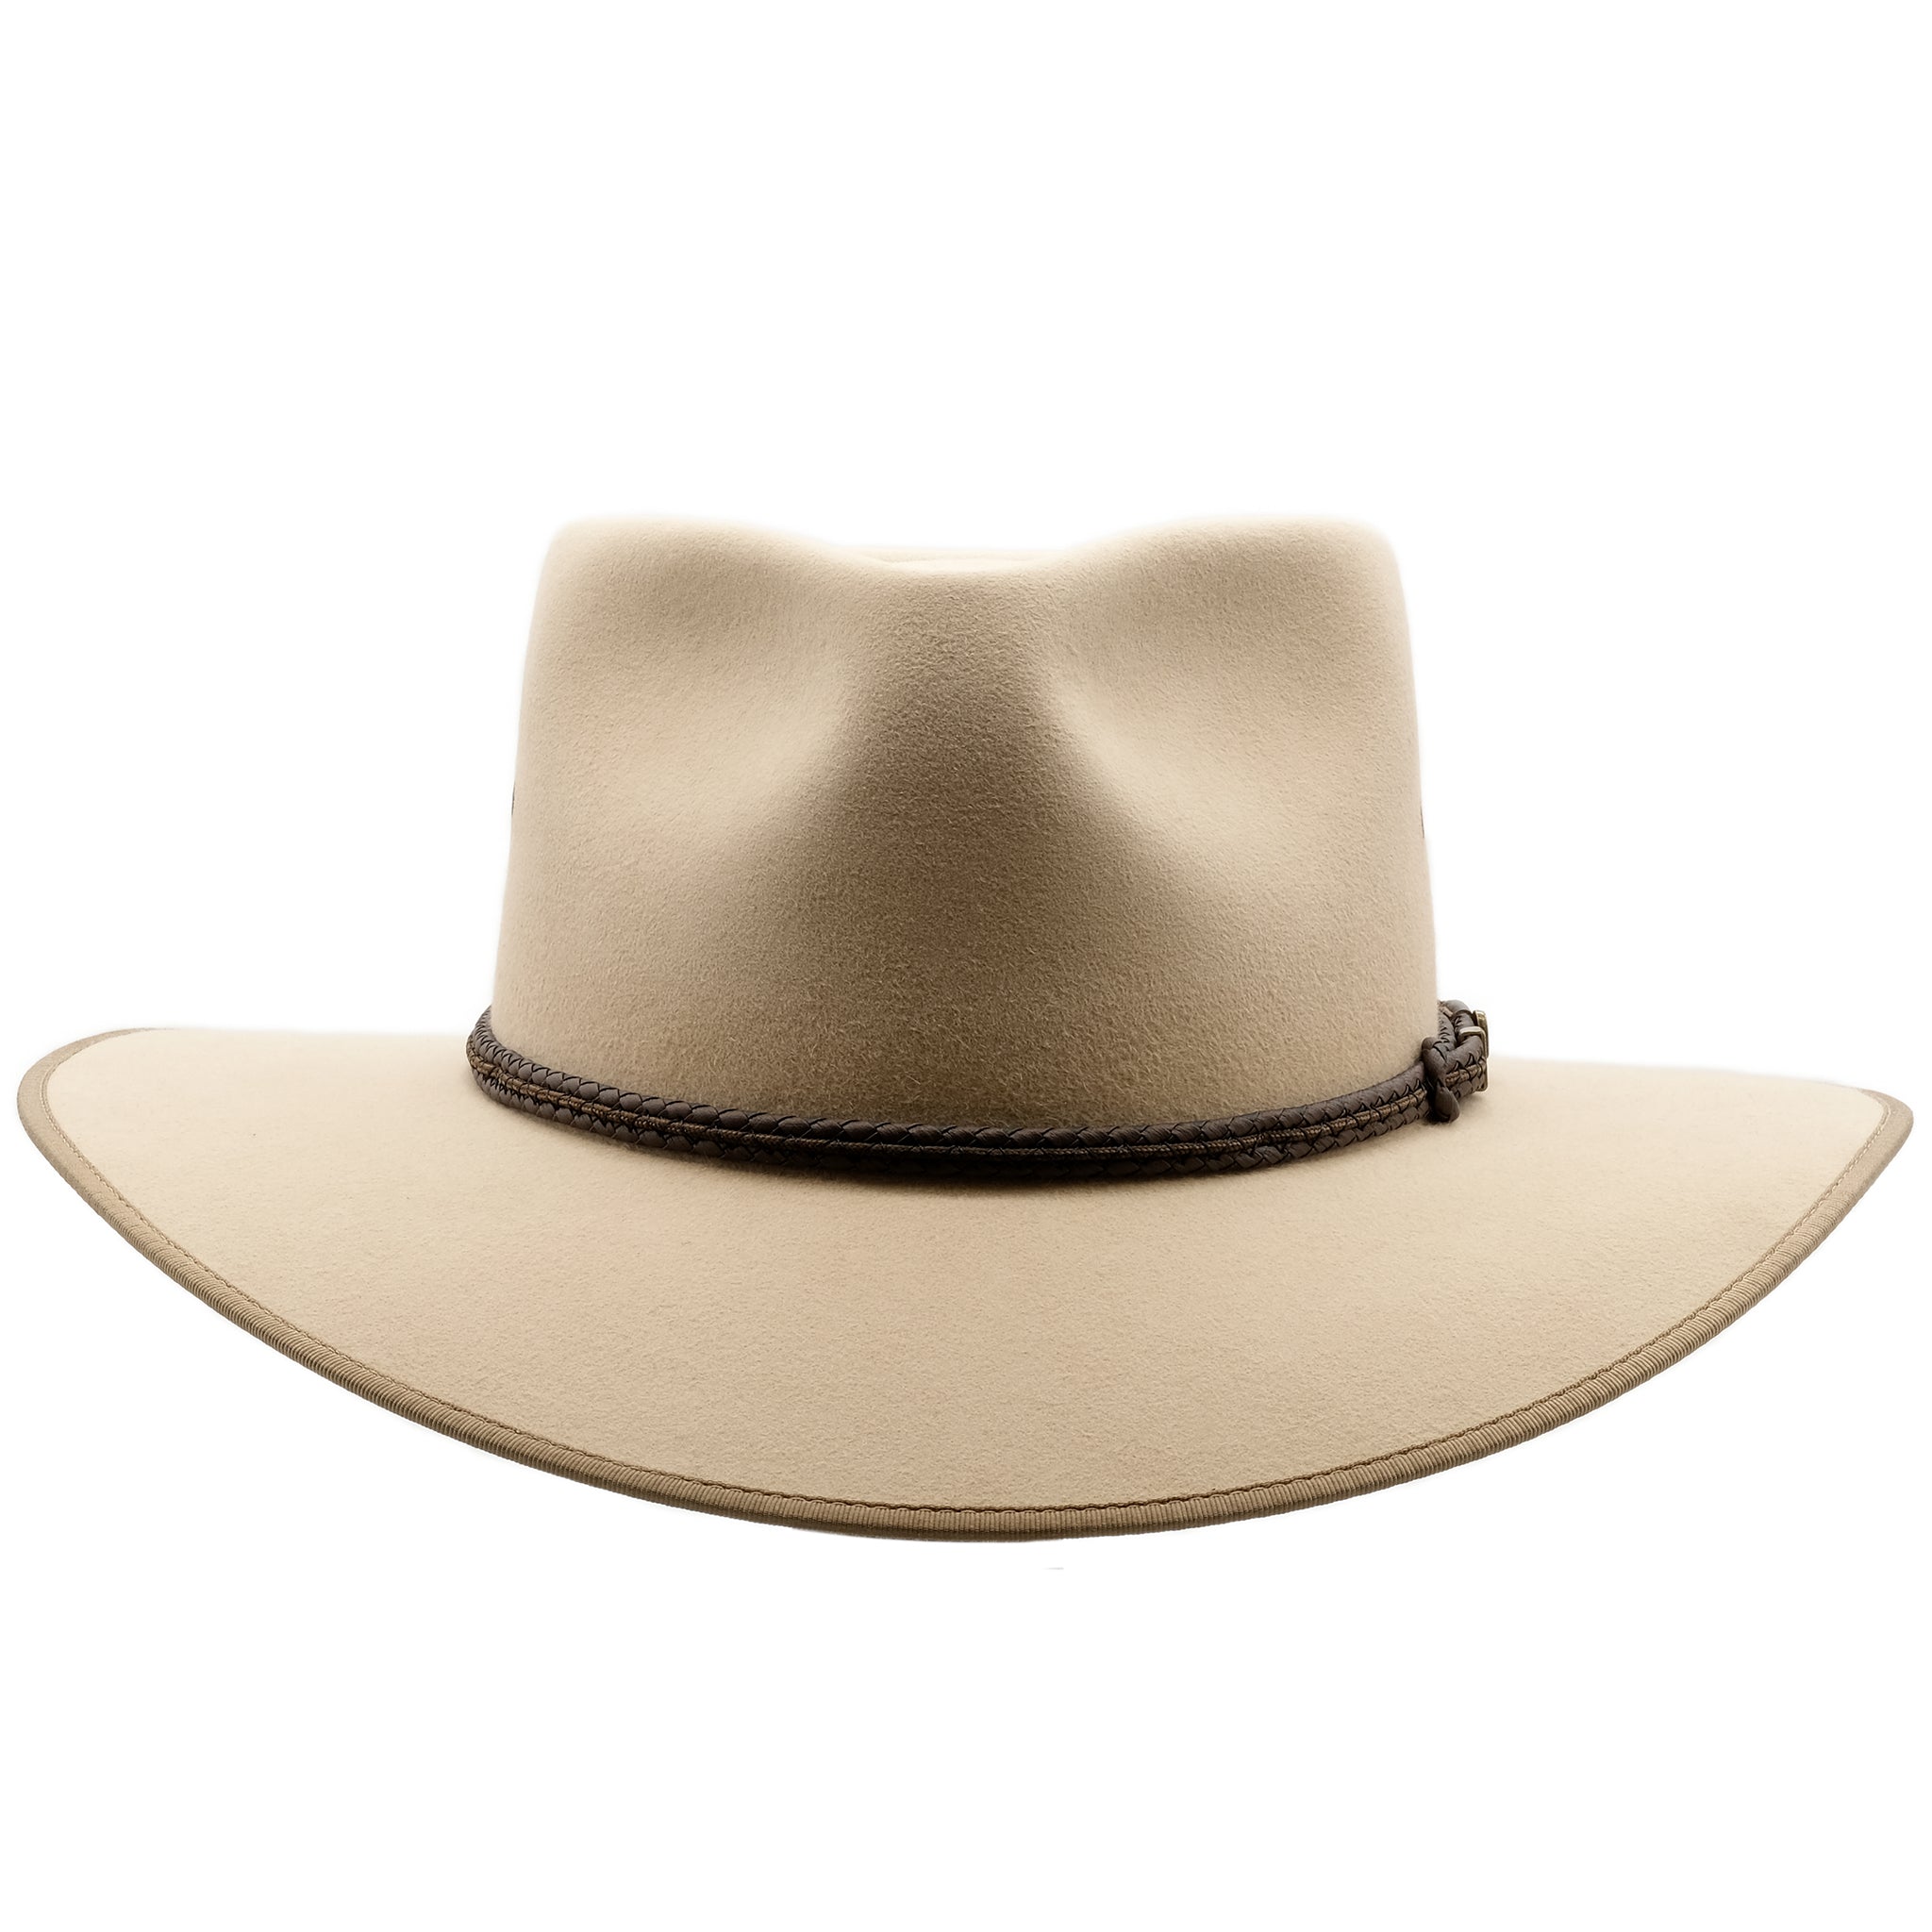 Front view of the Akubra Cattleman hat in sand colour